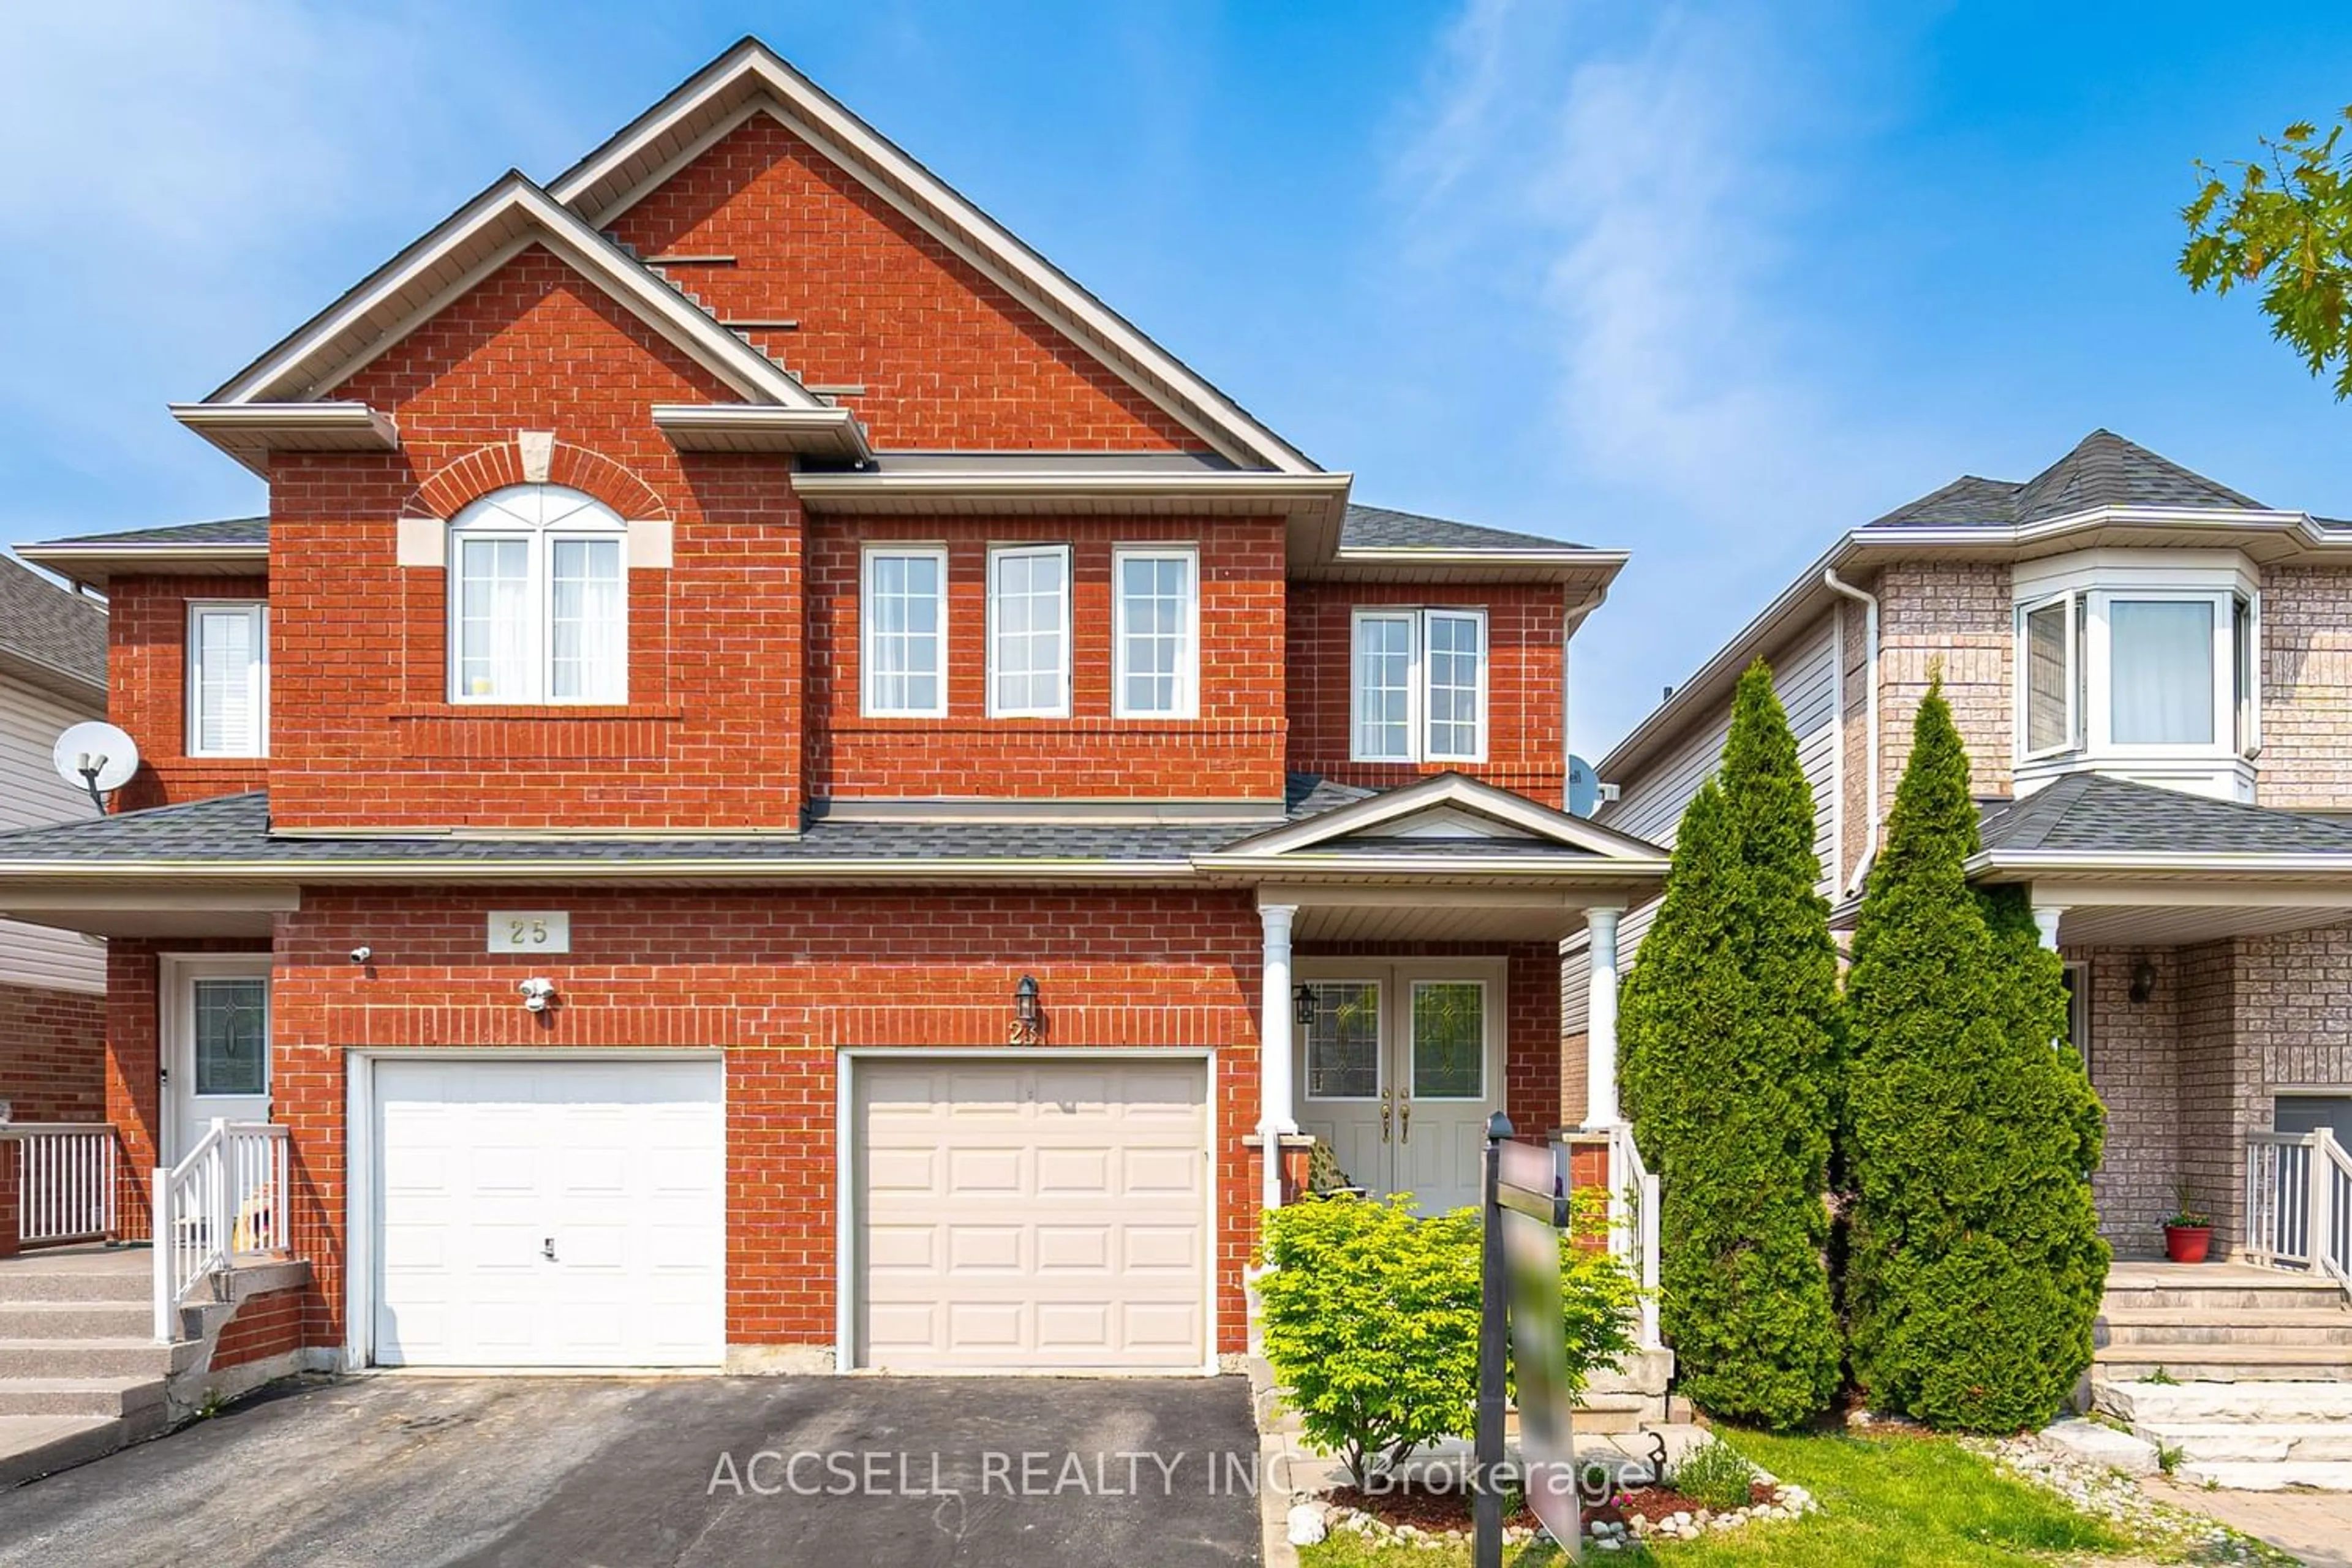 Home with brick exterior material for 23 Sloan Dr, Milton Ontario L9T 5P7